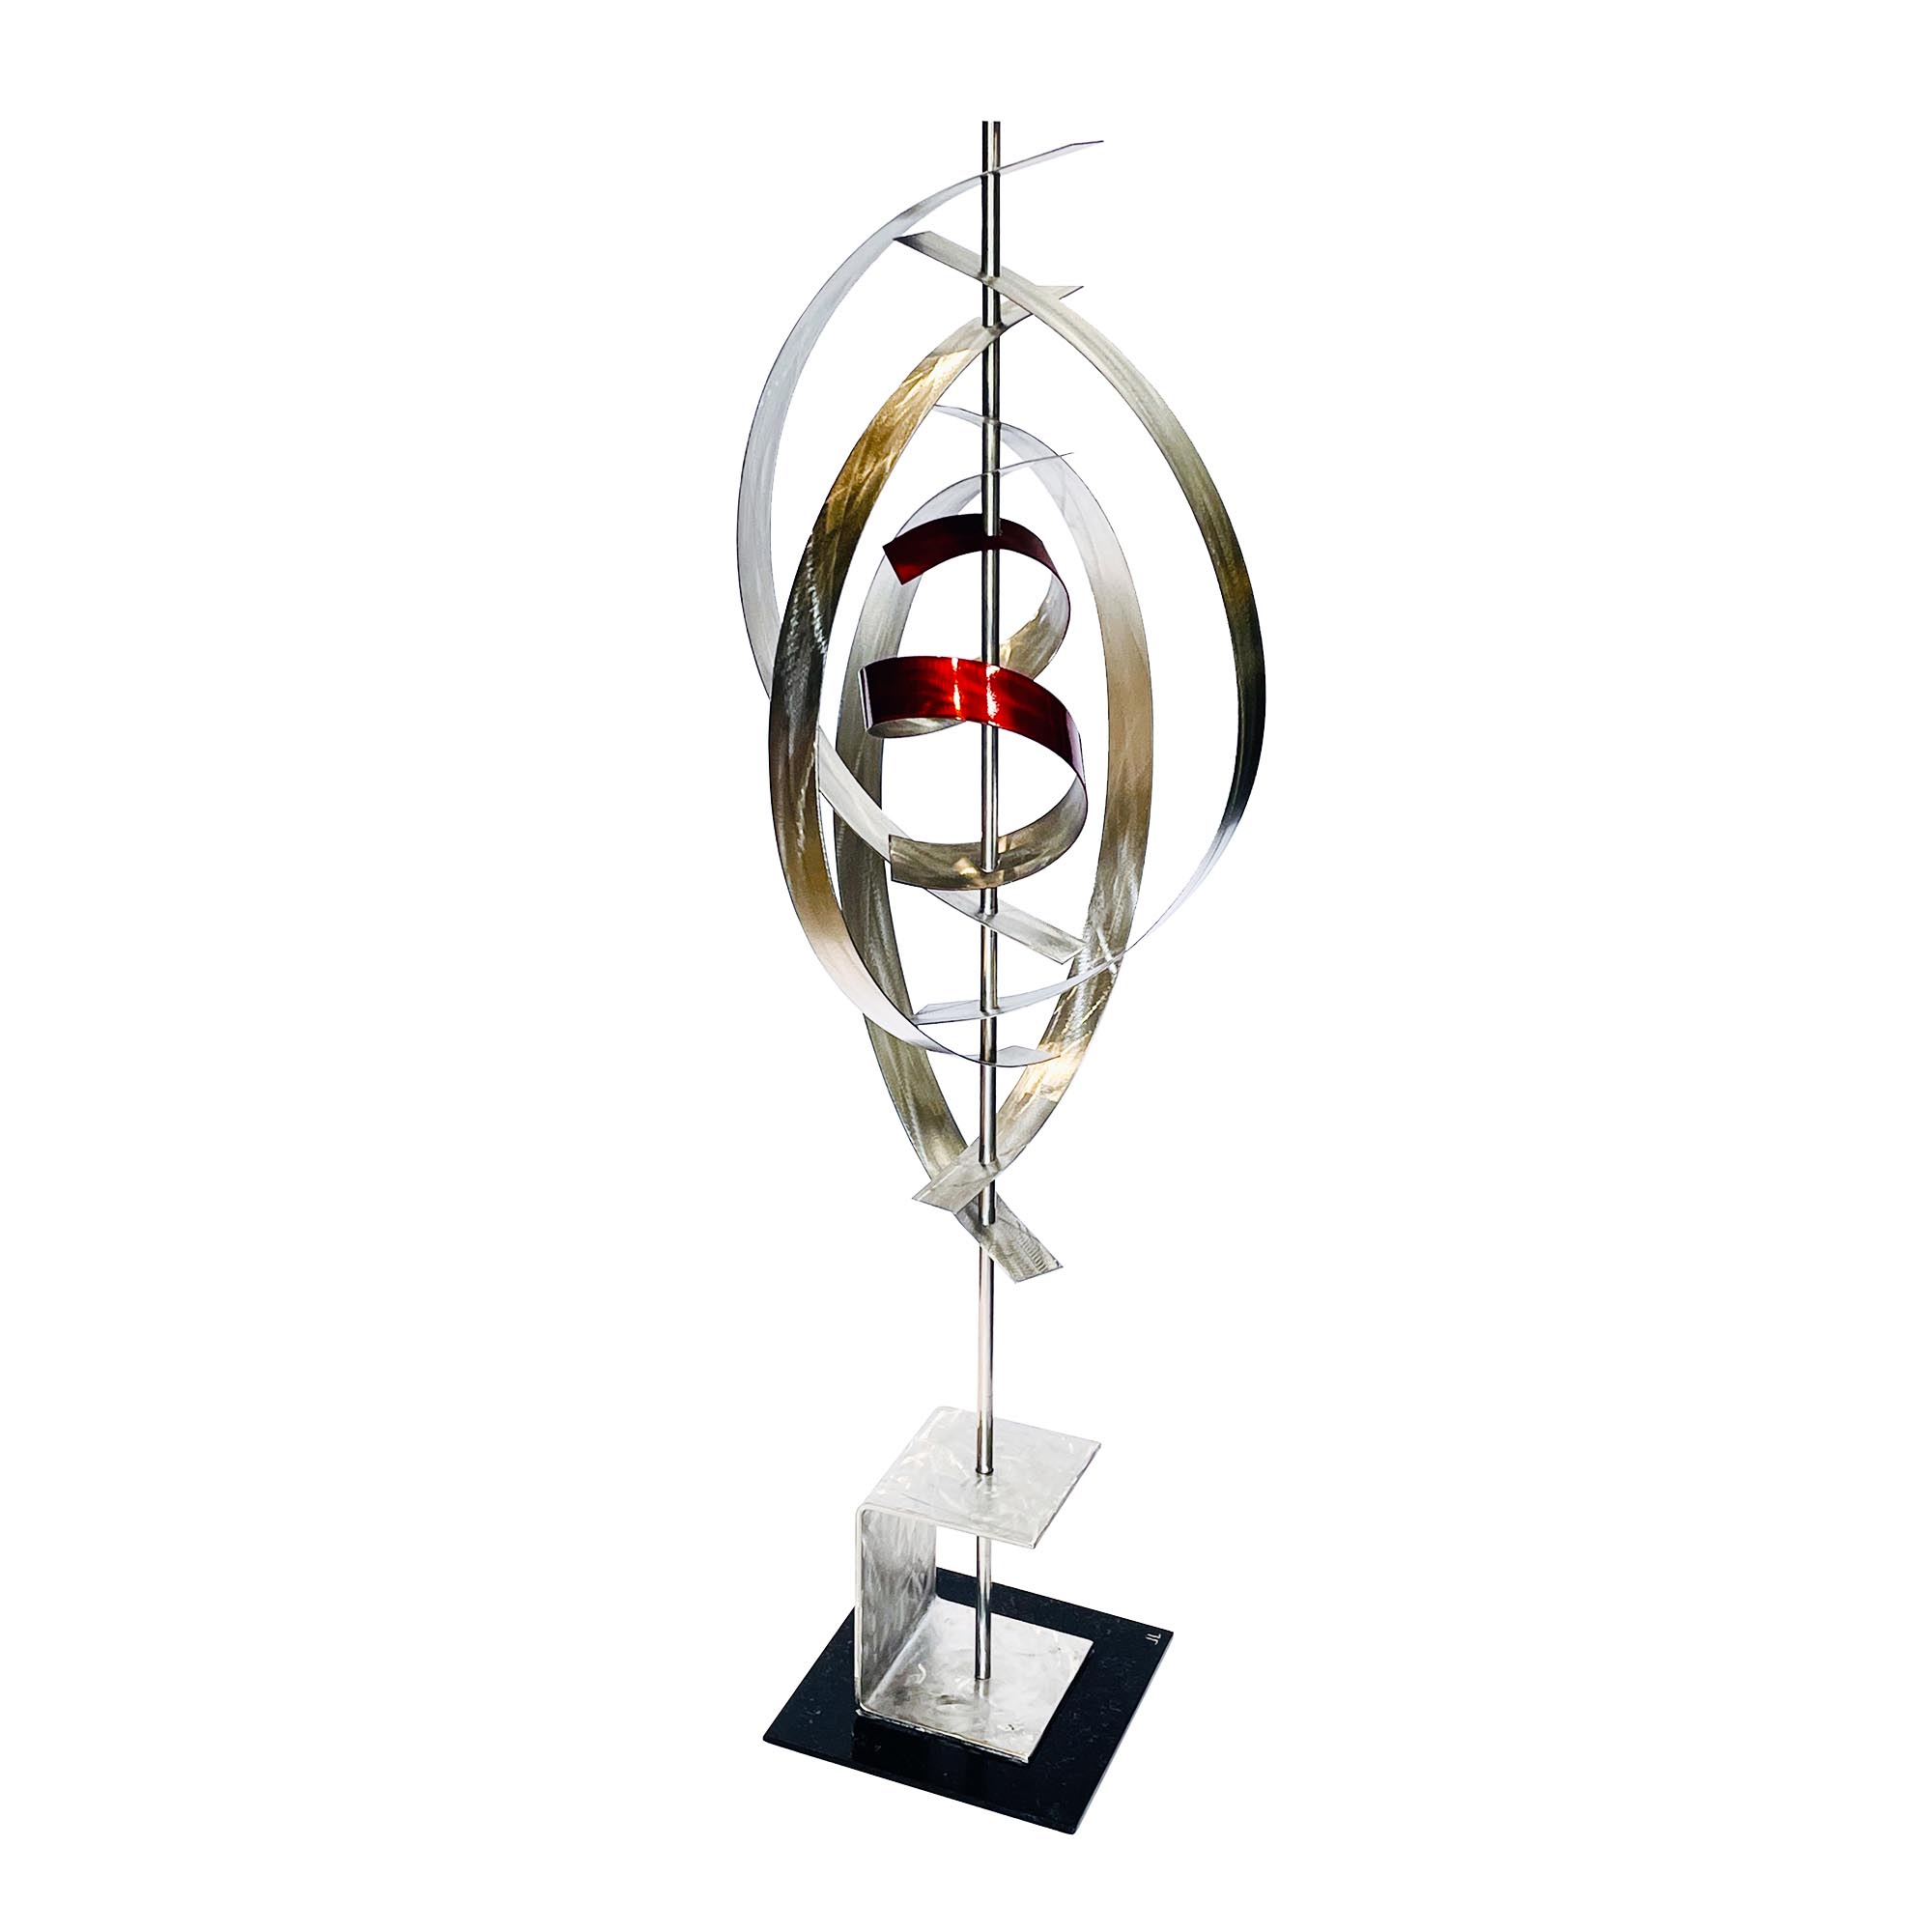 Capture Red by Jackson Wright - Abstract Metal Sculpture, Kinetic Sculpture - Image 2